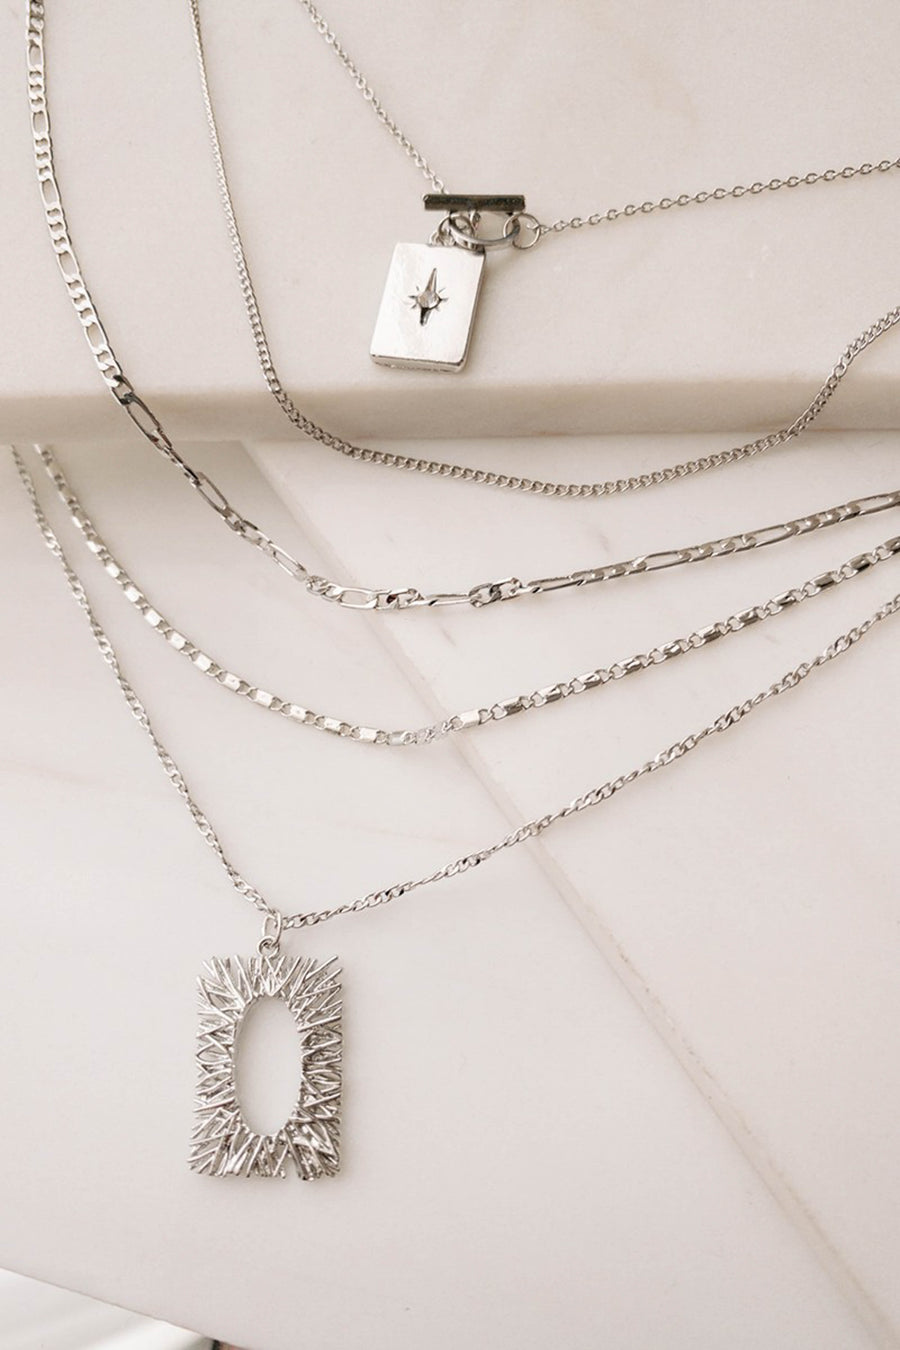 Silver Multilayered Charm Necklace